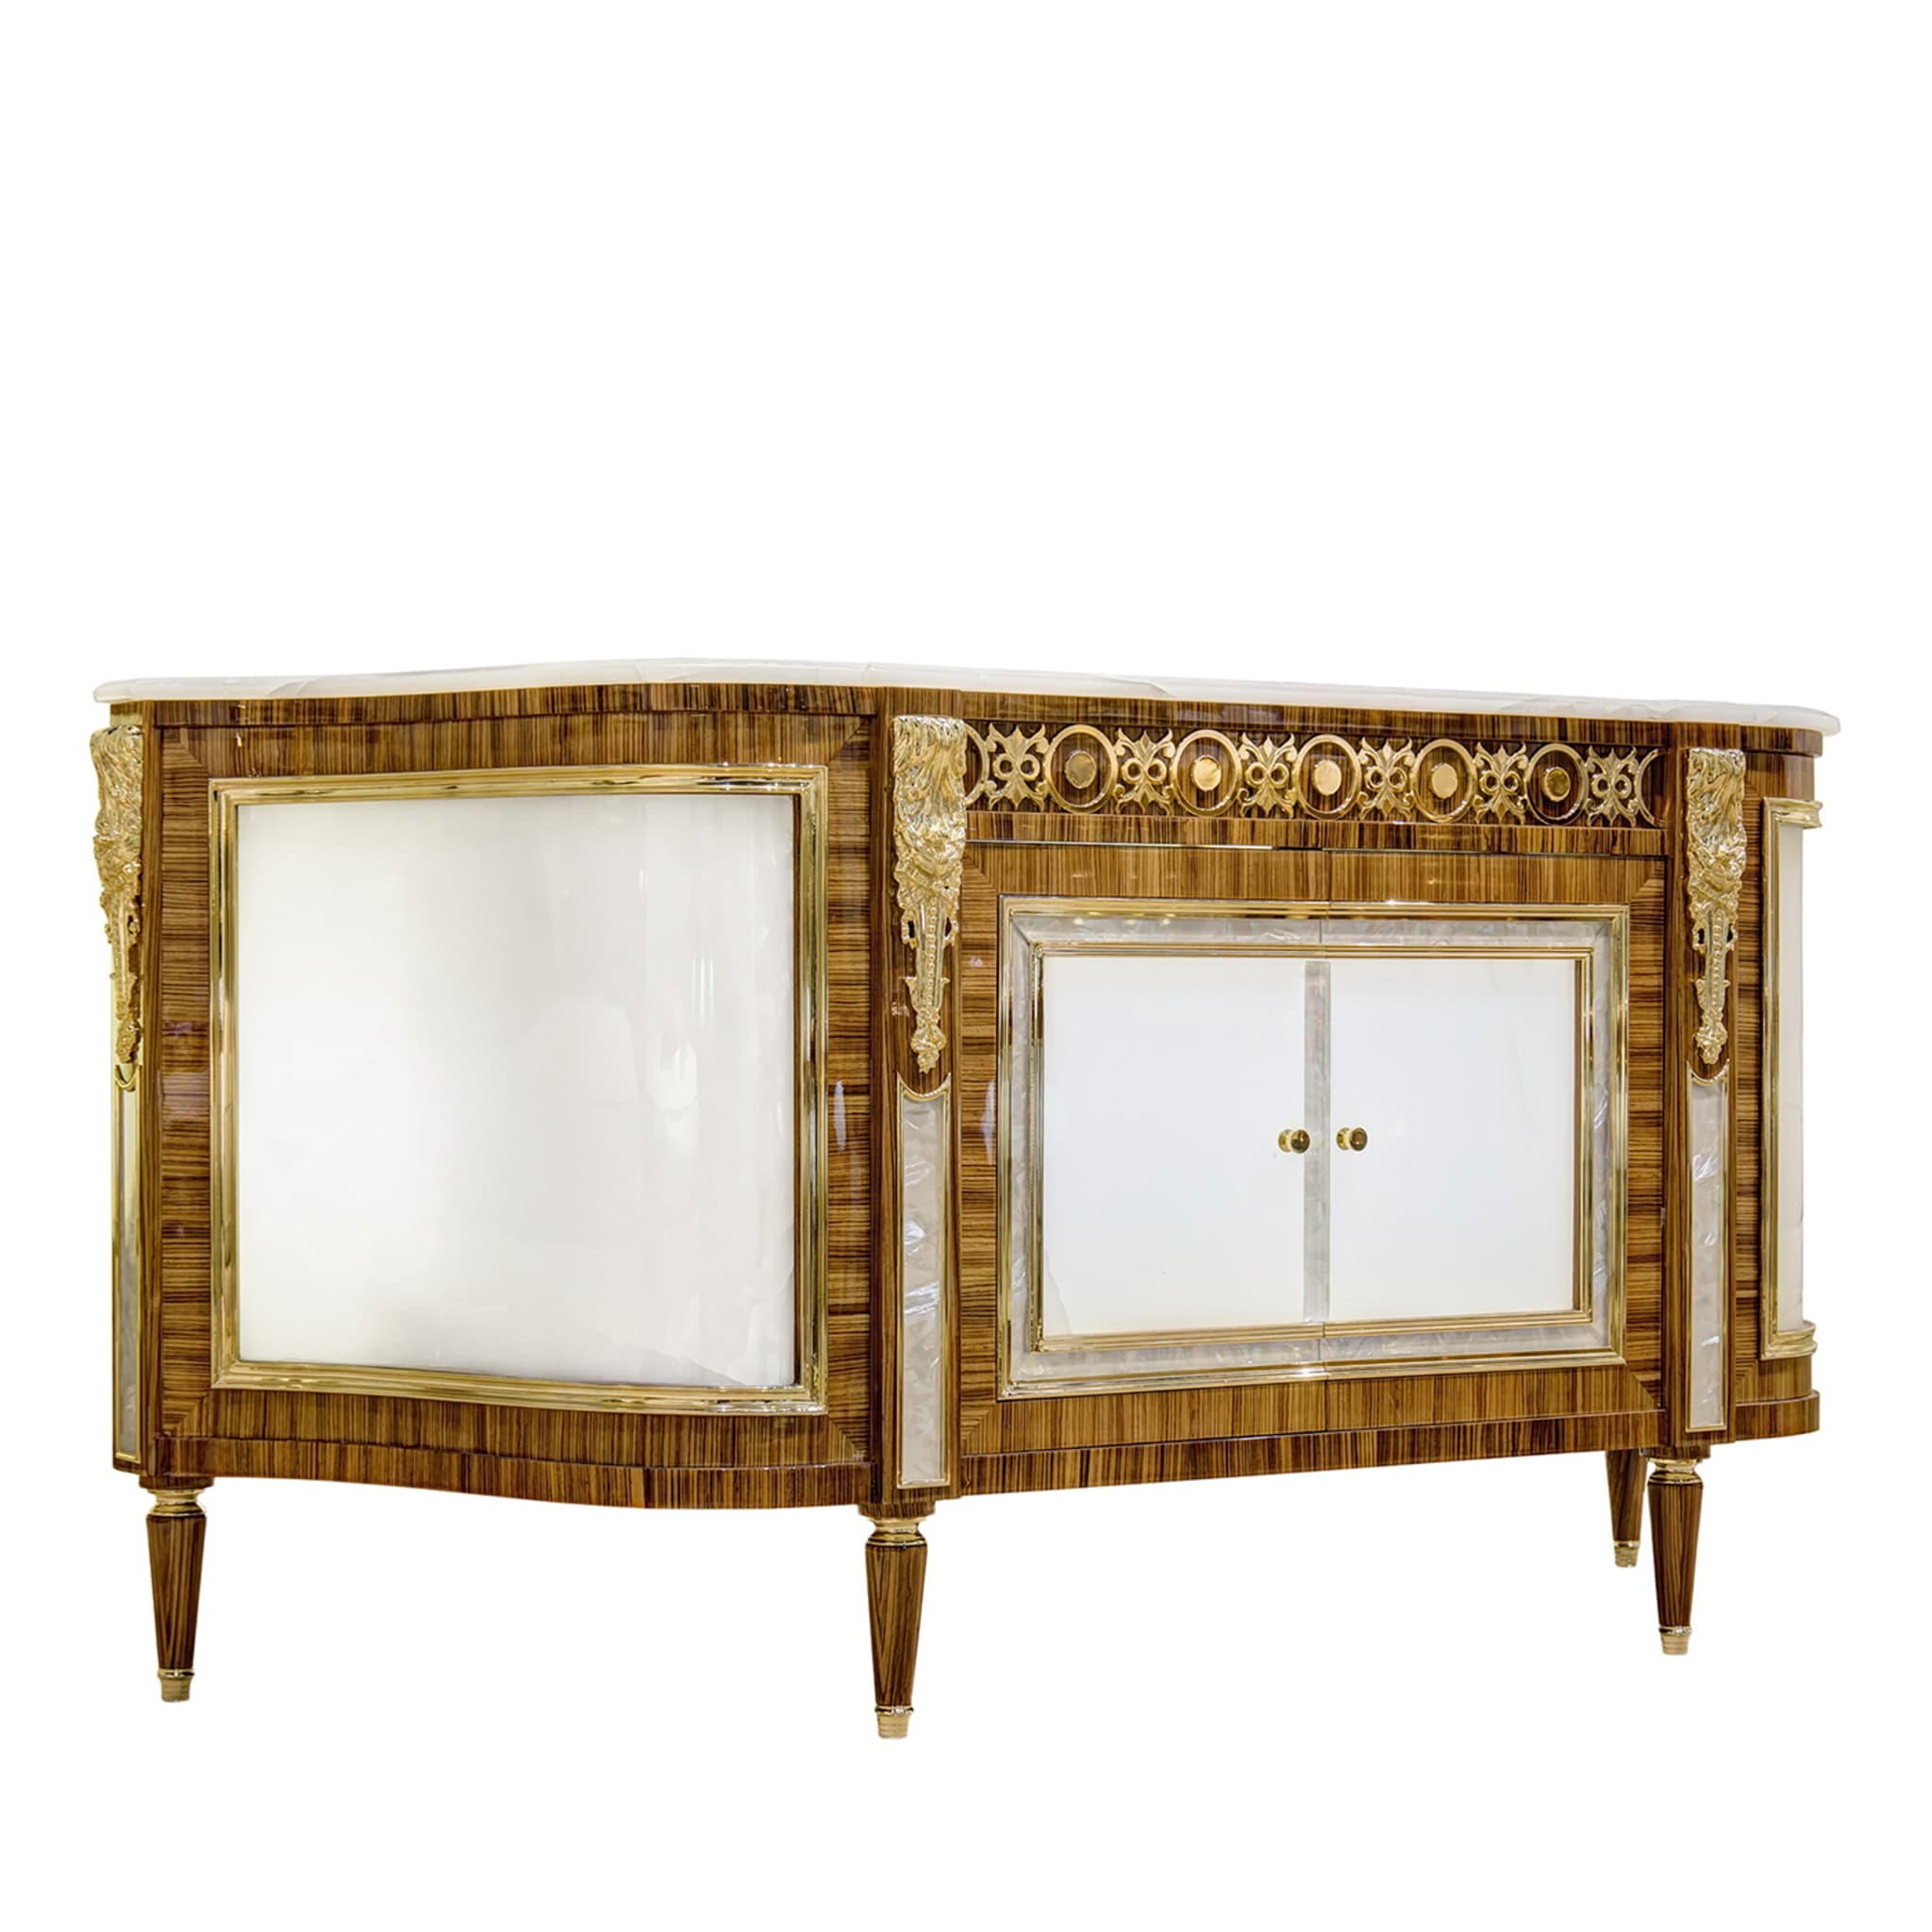 ZEBRANO SIDEBOARD WITH ONYX AND PEARL - Alternative view 2